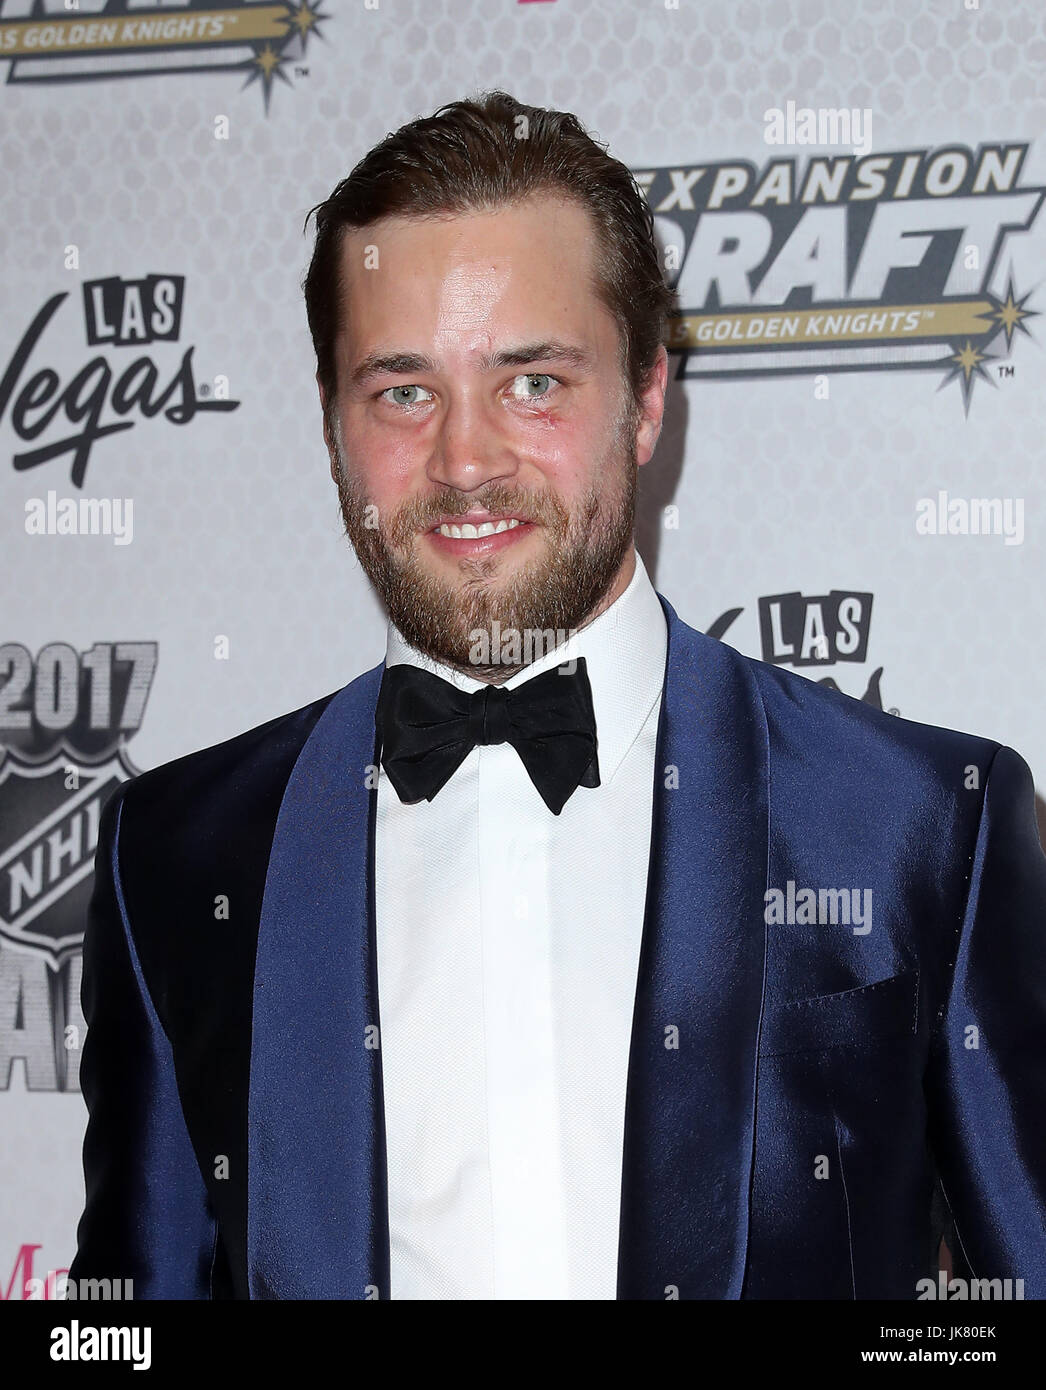 Victor Hedman's suit game is the best in the league